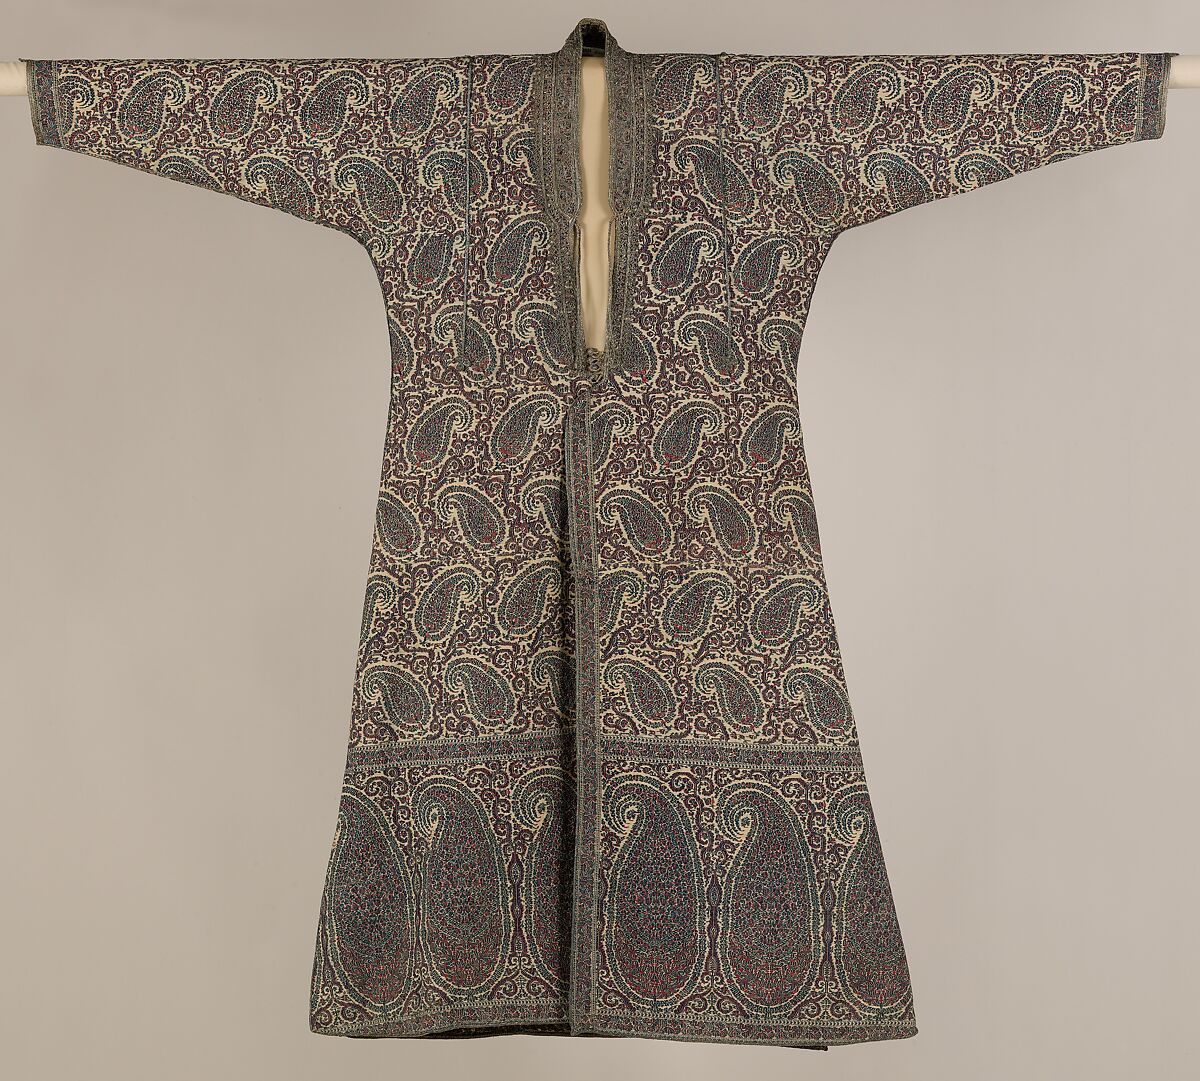 Man's Coat (Choga), Wool, metal wrapped thread; double interlocking twill tapestry weave, applied decorative braid 